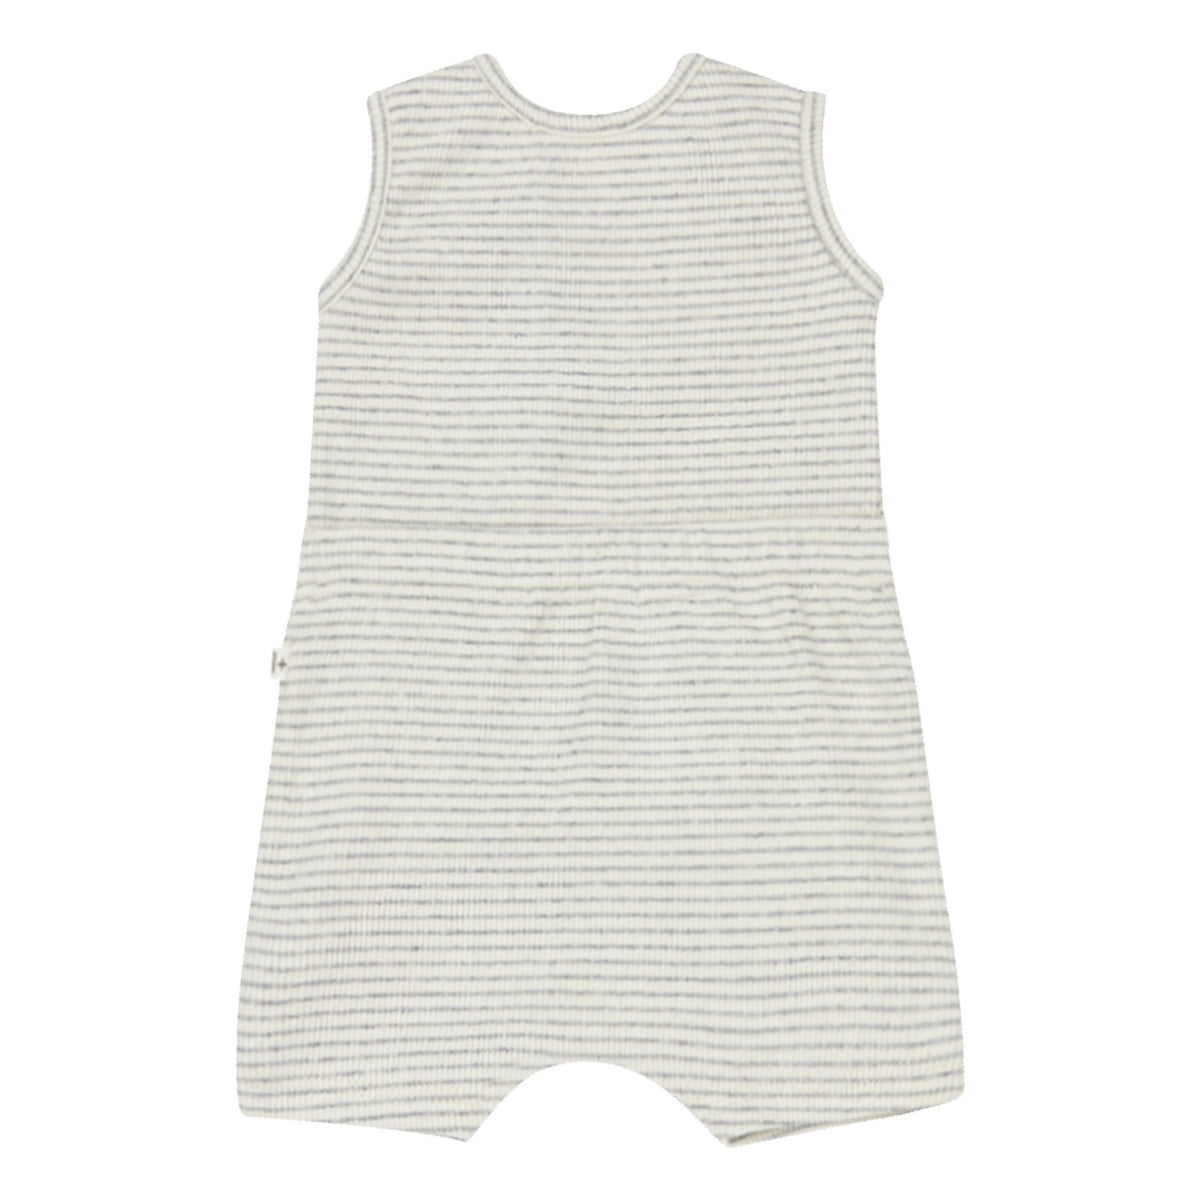 White and light grey striped organic cotton jumpsuit short sleved back view